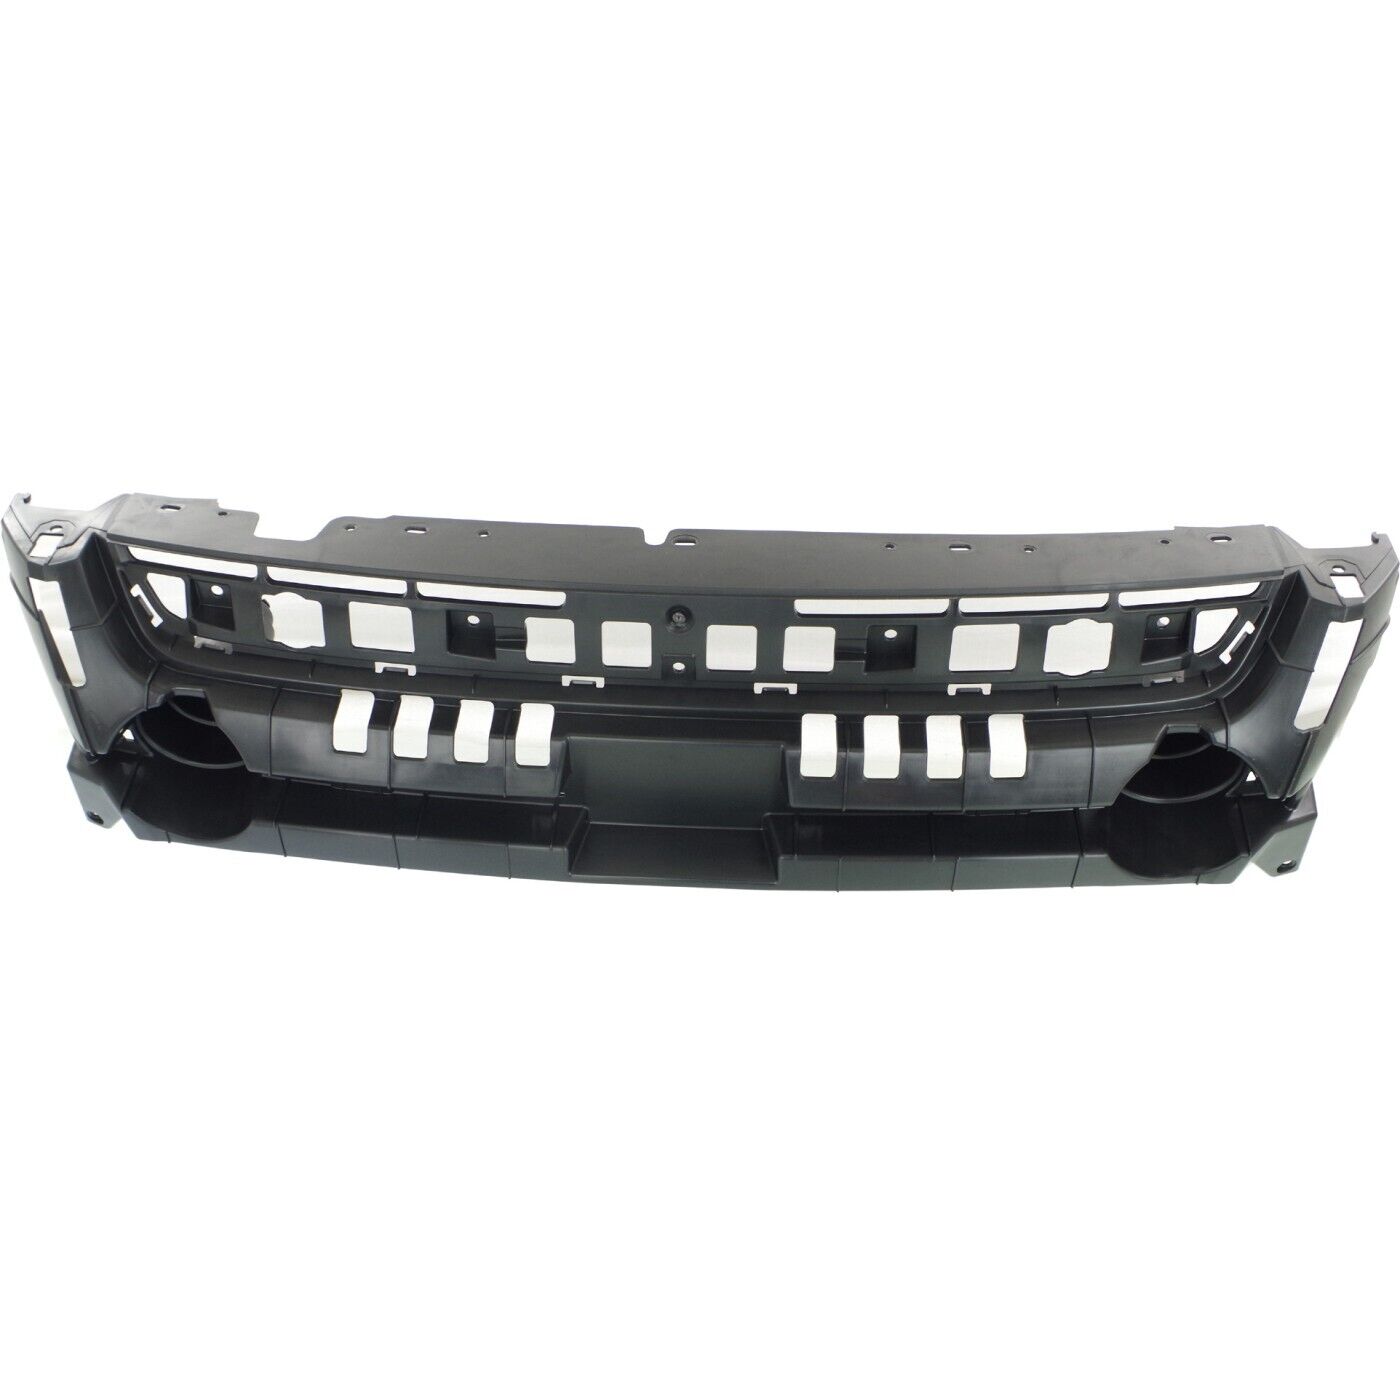 Header Panel Nose Headlight lamp Mounting CJ5Z8A284B for Ford Escape 2013-2016